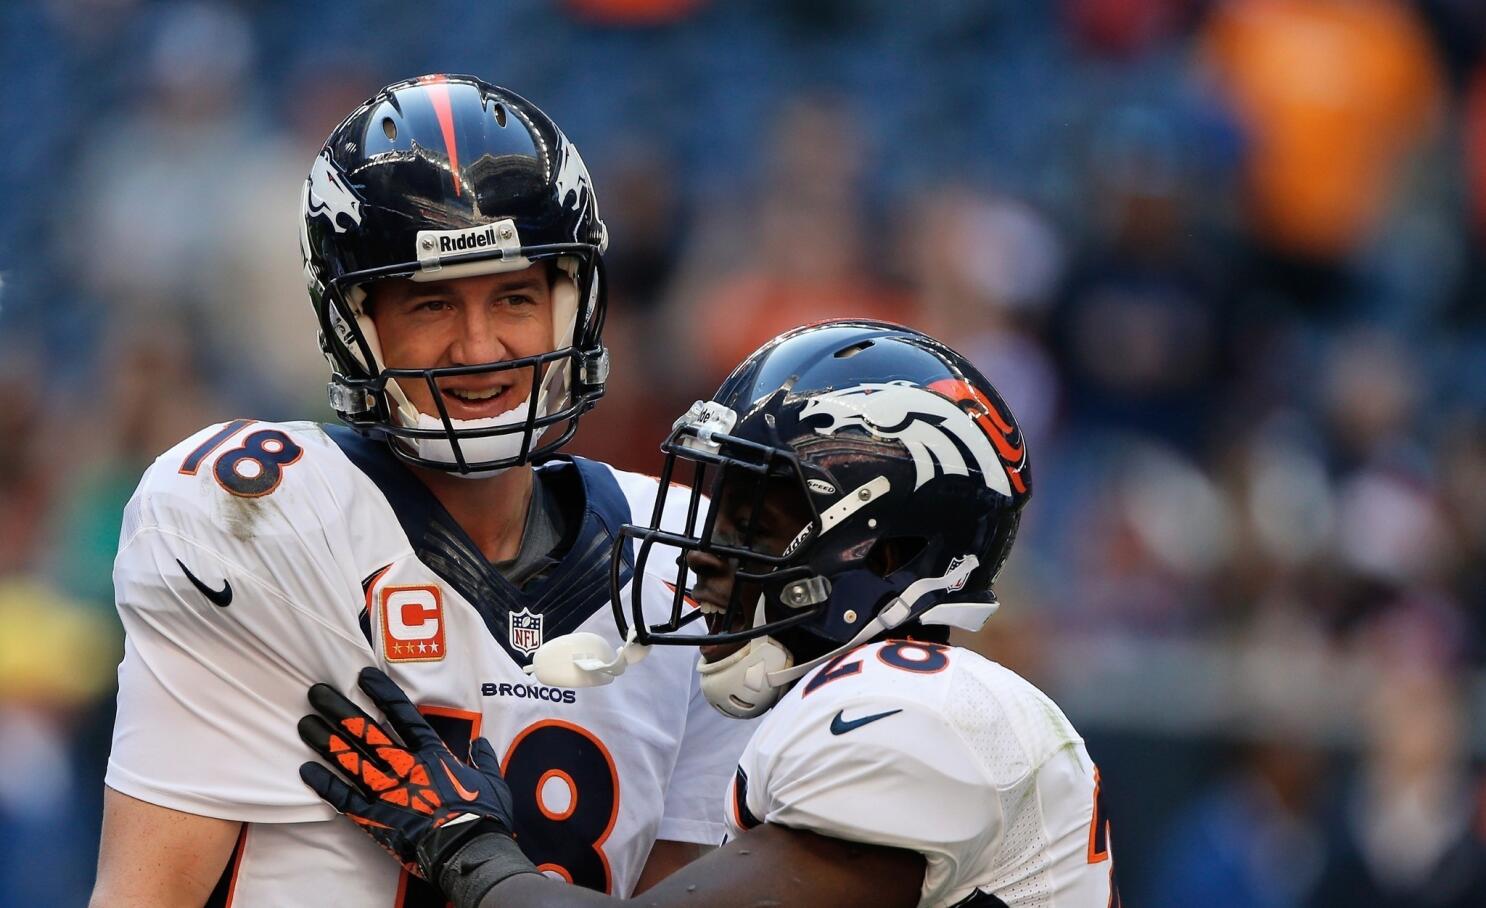 Peyton Manning throws two TDs to down Detroit as Broncos stay perfect, Denver Broncos